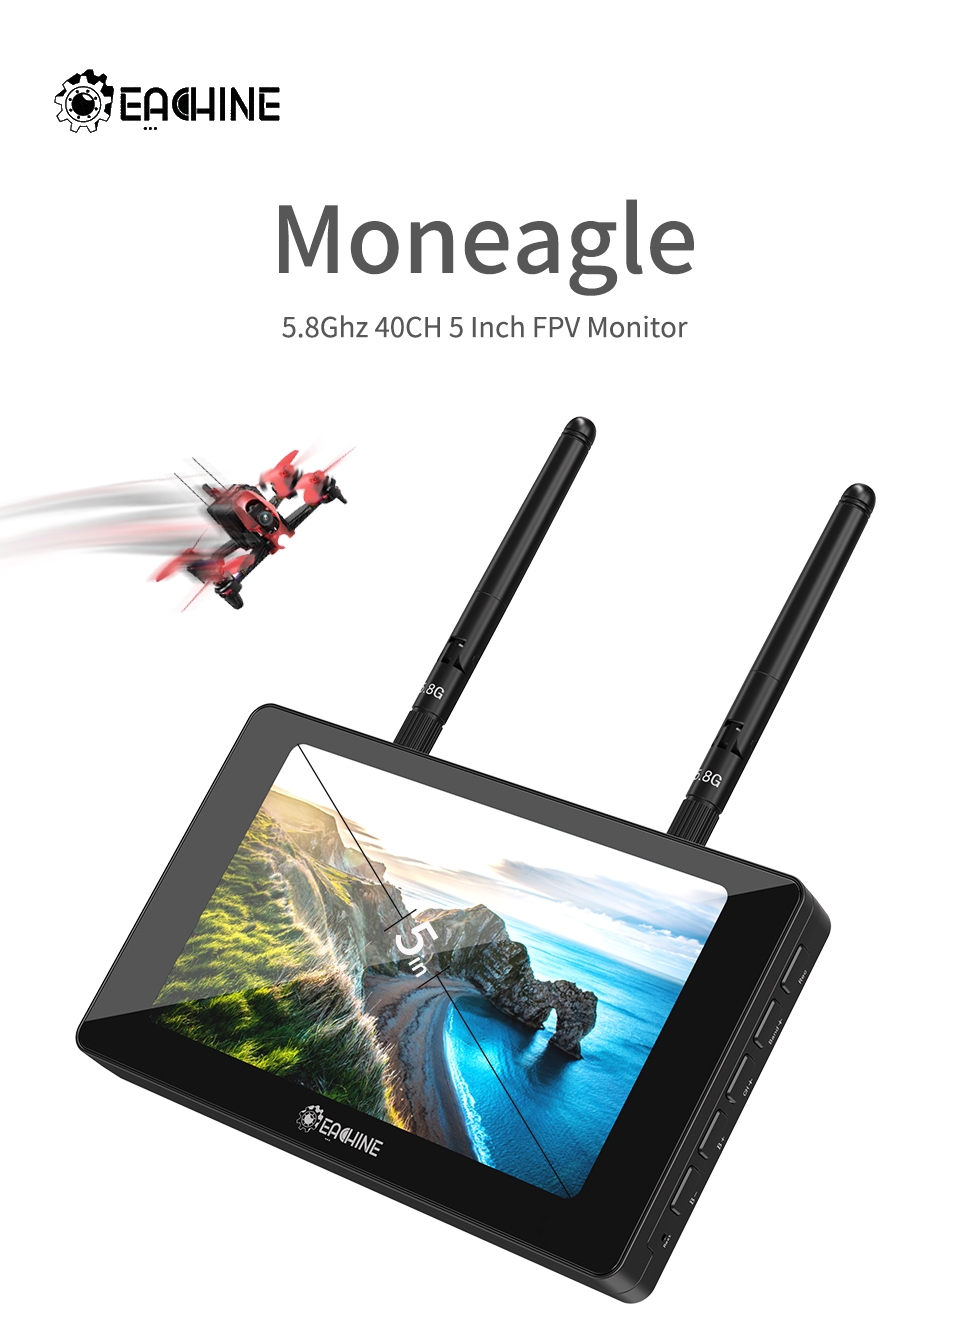 $62.99 for Eachine Moneagle 5 Inch 5.8GHz 40CH Diversity Receiver FPV Monitor